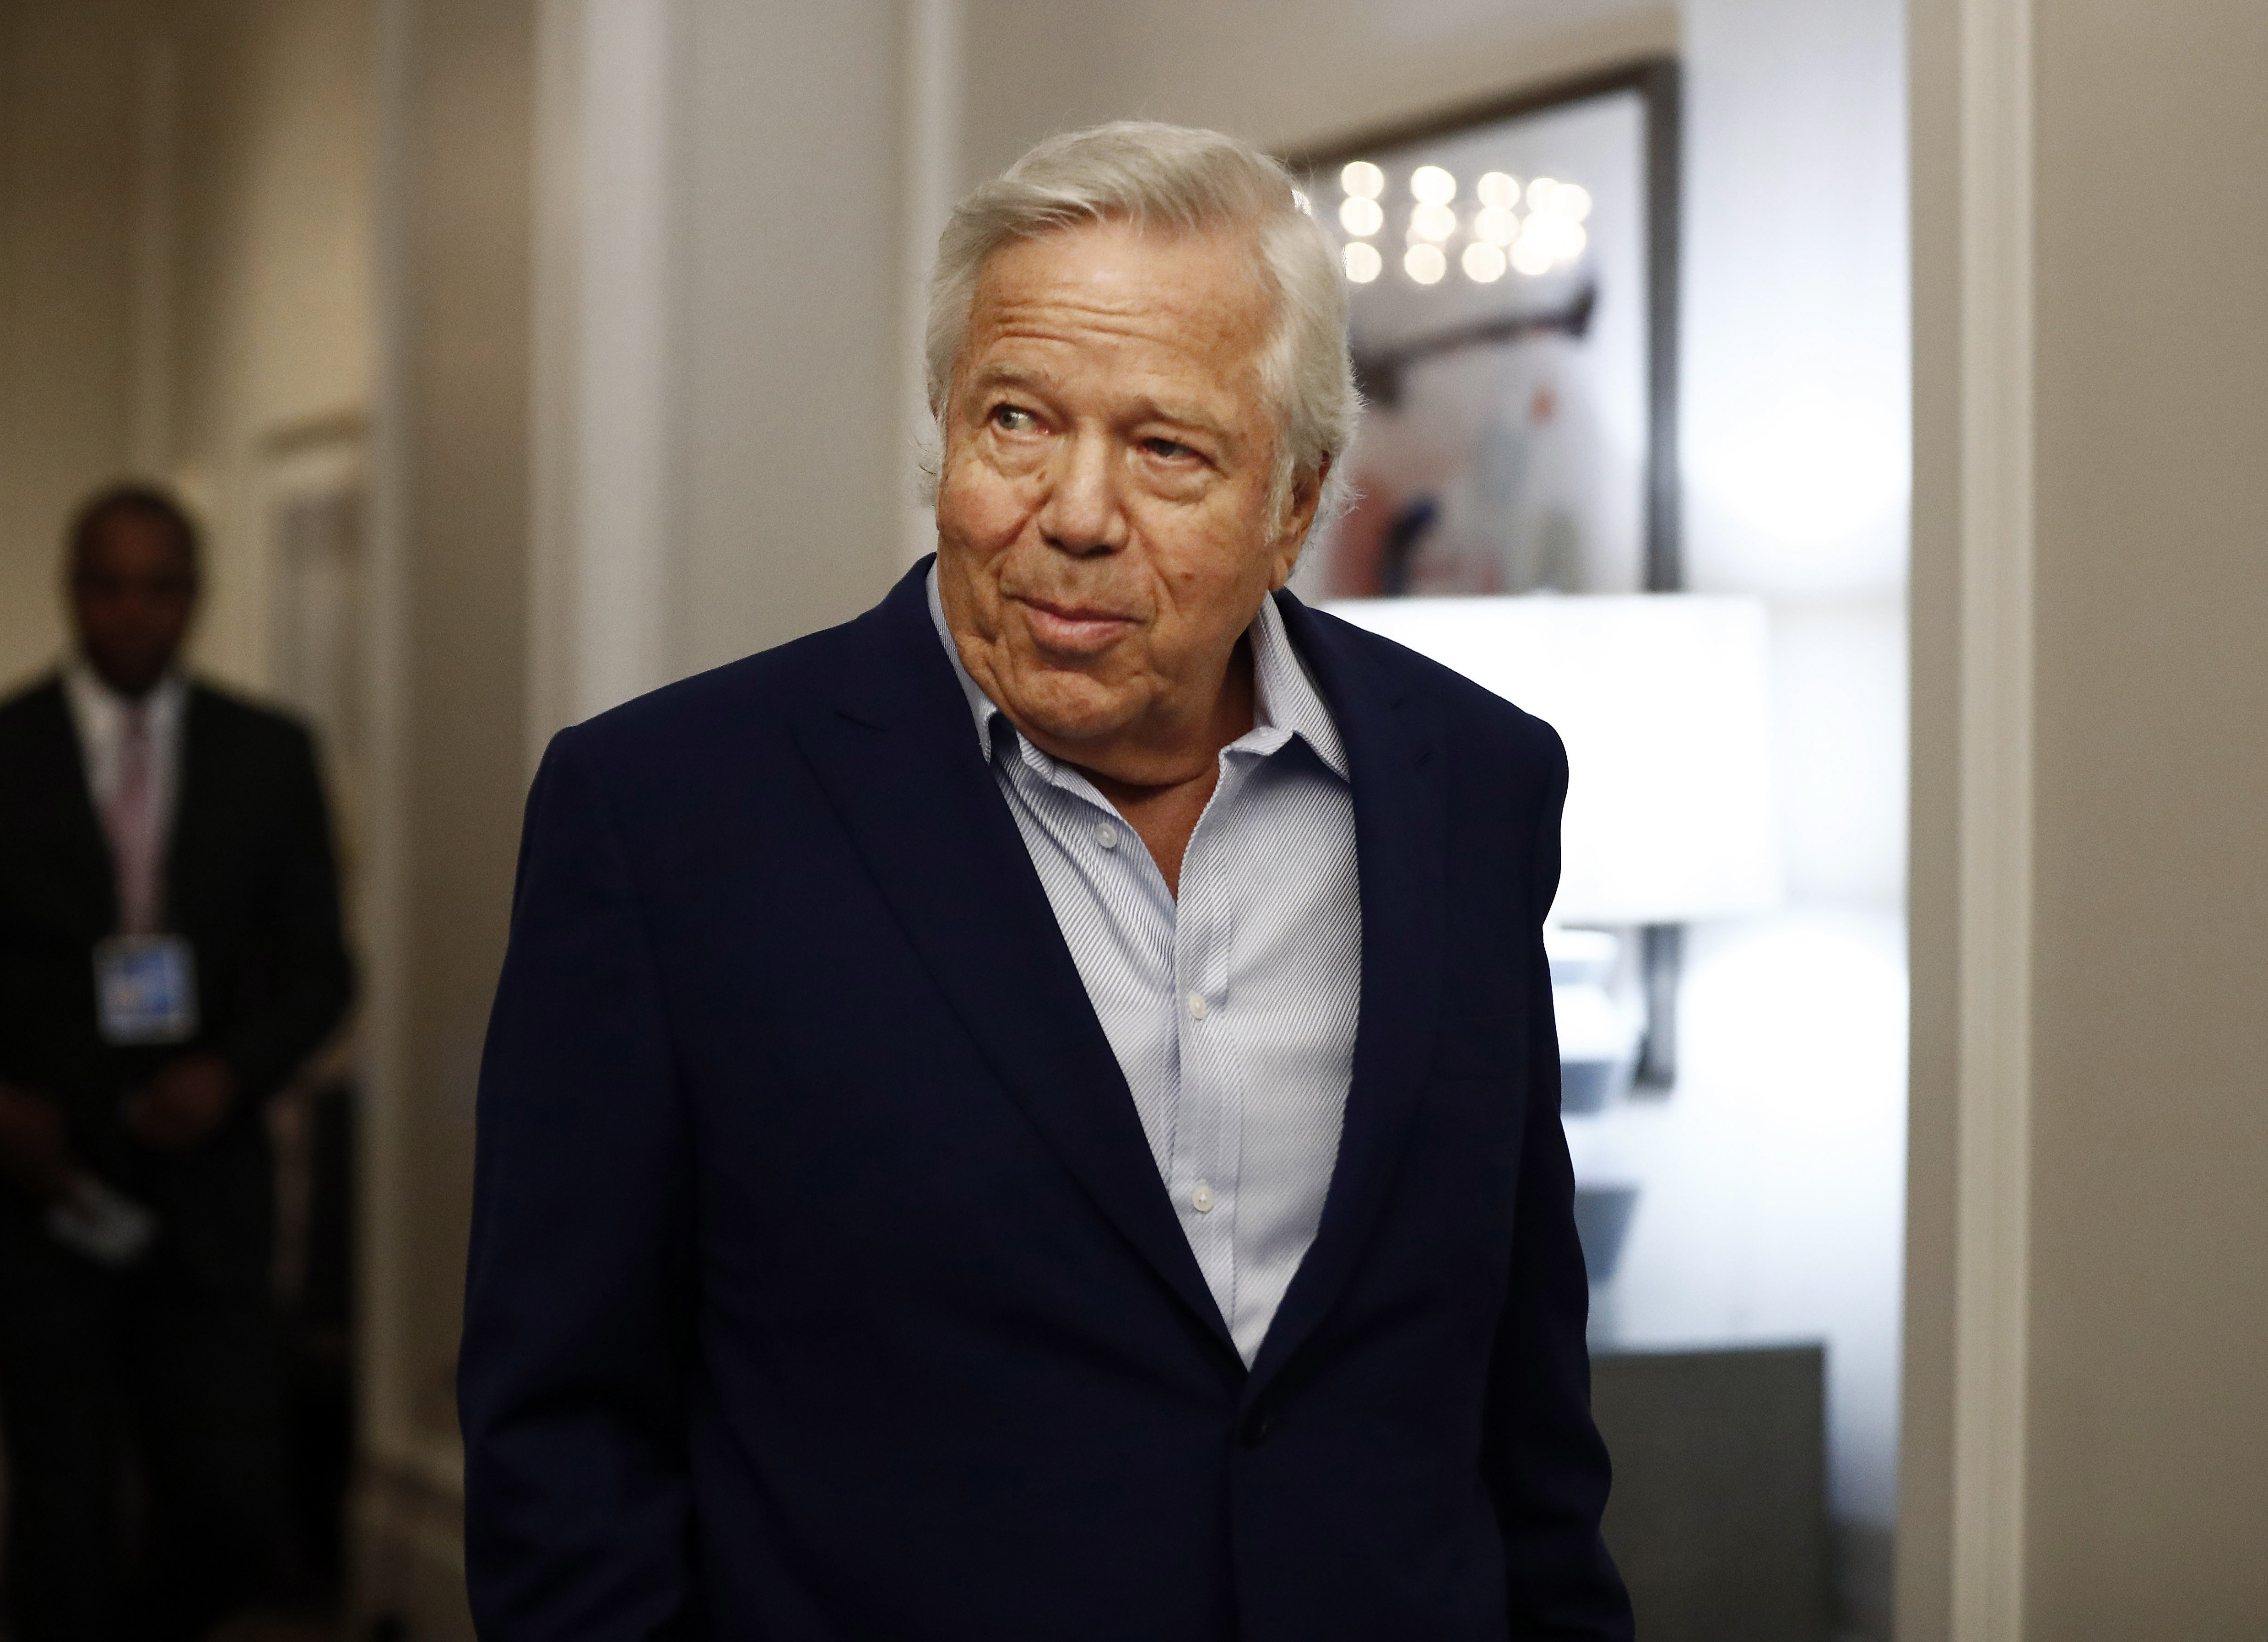 FILE - In this Wednesday, May 22, 2019 file photo, New England Patriots owner Robert Kraft arrives to the NFL football owners meeting in Key Biscayne, Fla.(AP Photo/Brynn Anderson, File)